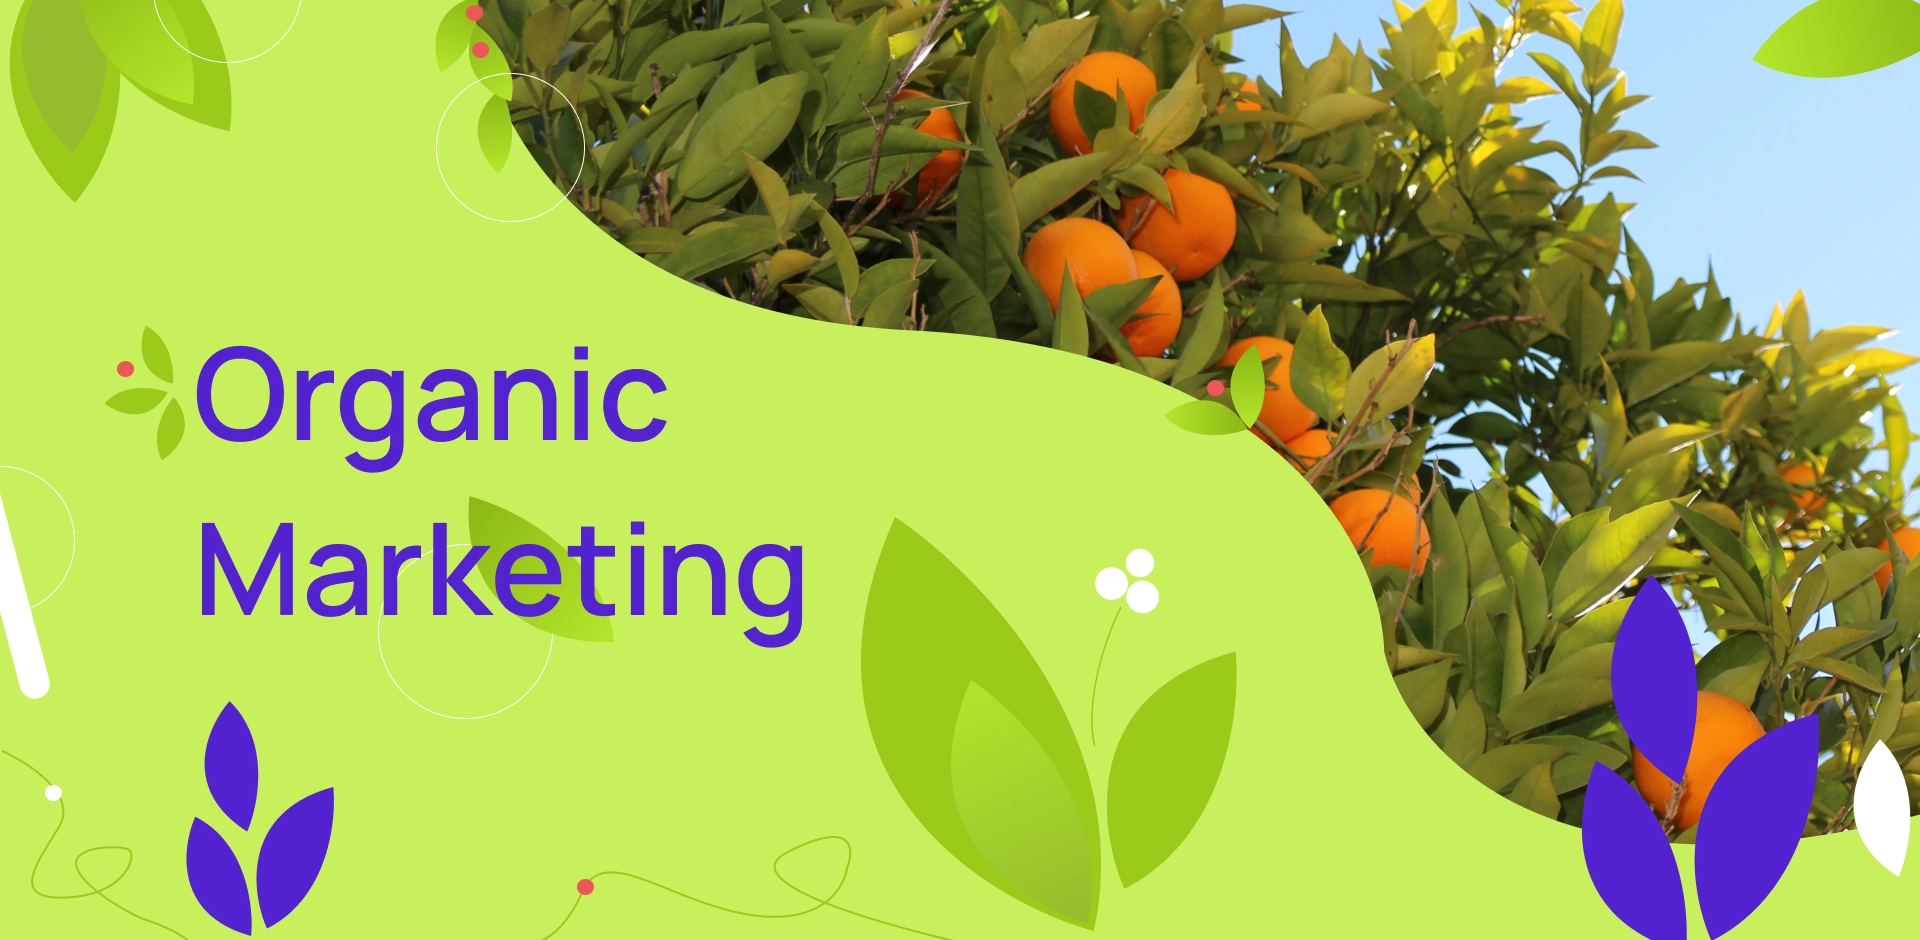 Graphic with a photo of a tree with oranges, a green background with leaves and the words "Organic Marketing"